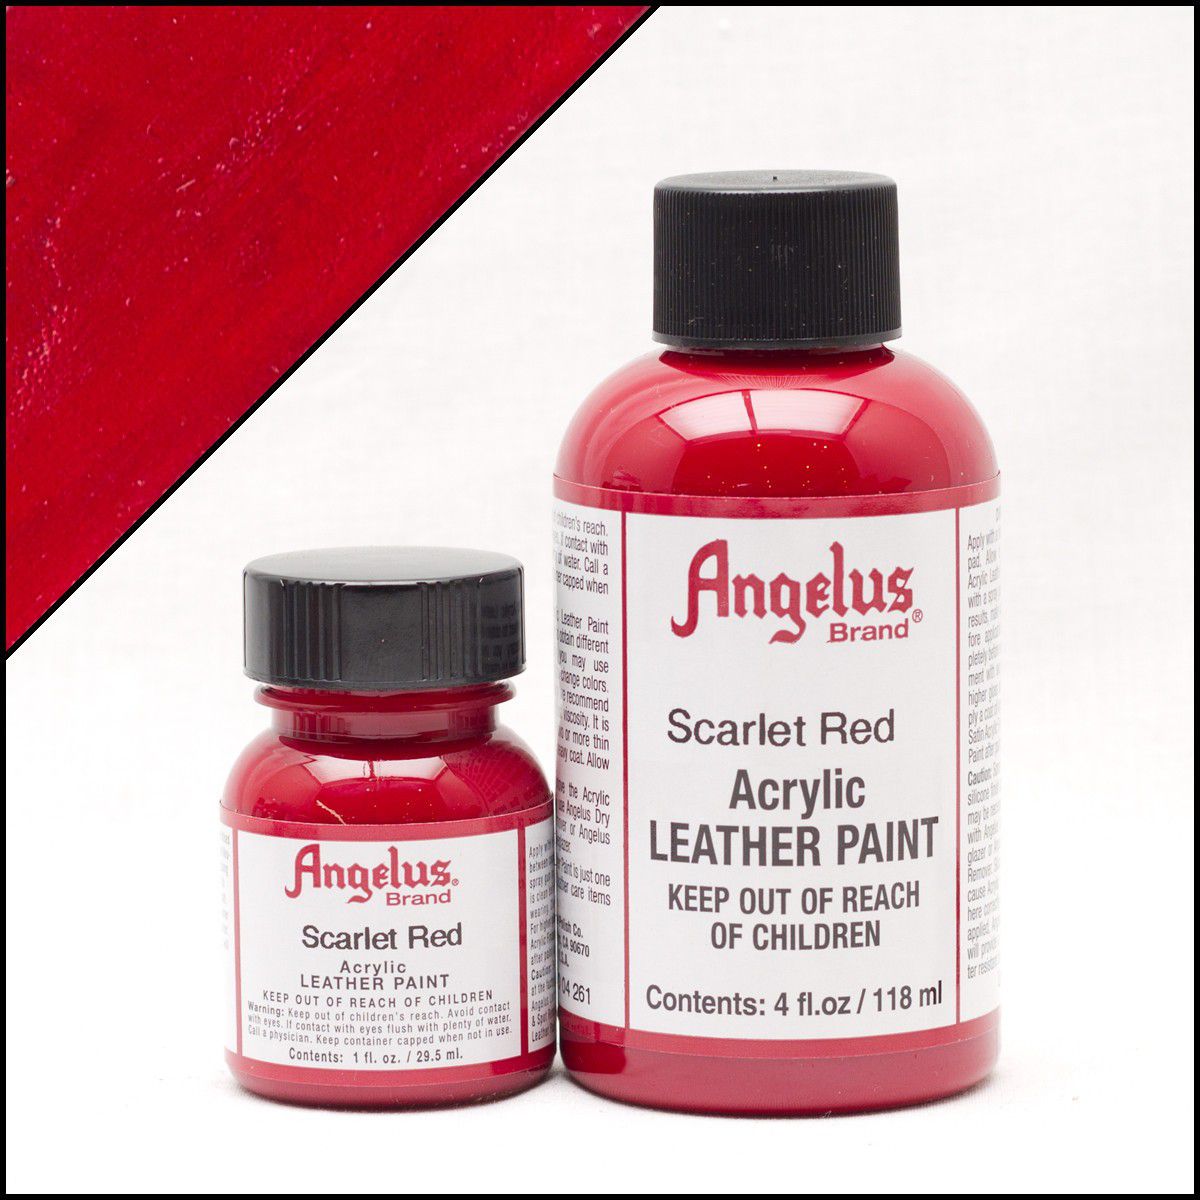 ANGELUS BRAND ACRYLIC LEATHER PAINT WATERPROOF VARIETY OF COLORS 1 fl.oz